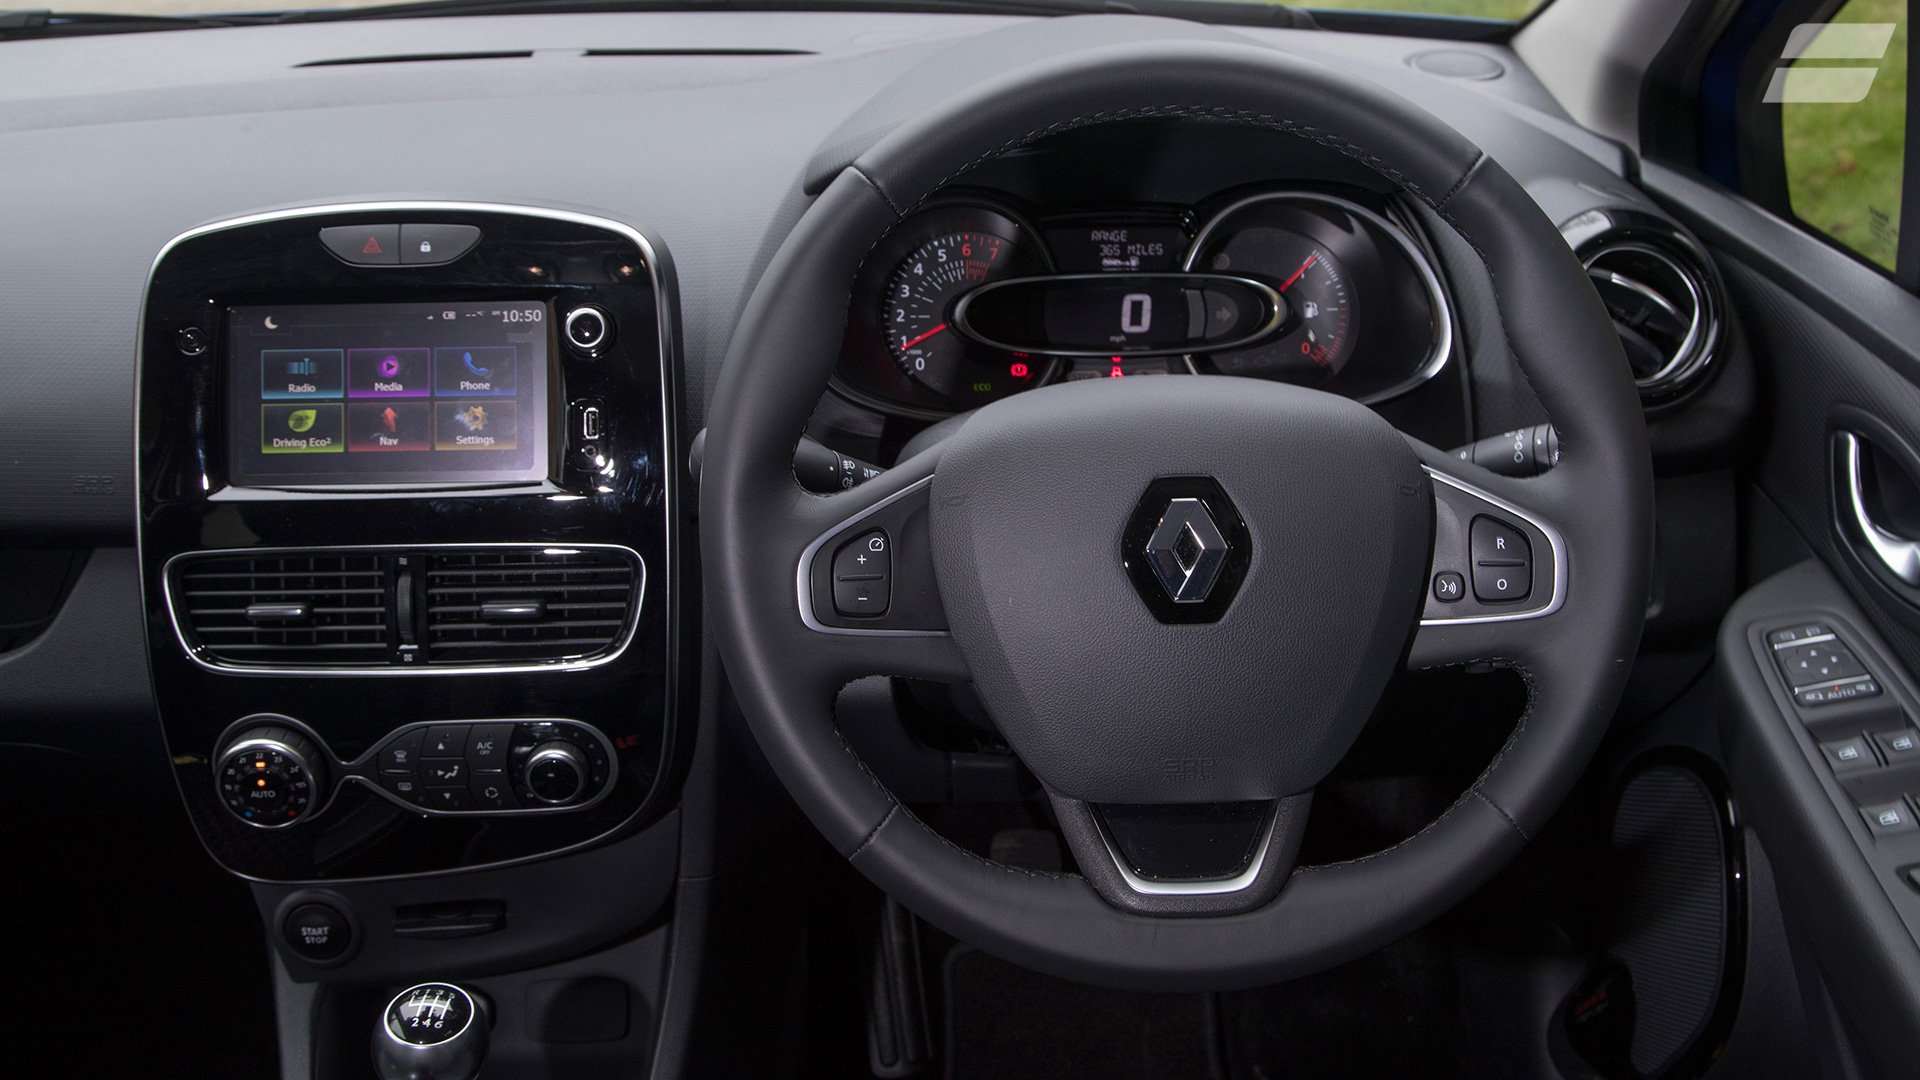 White Renault Clio Used Cars For Sale On Auto Trader Uk